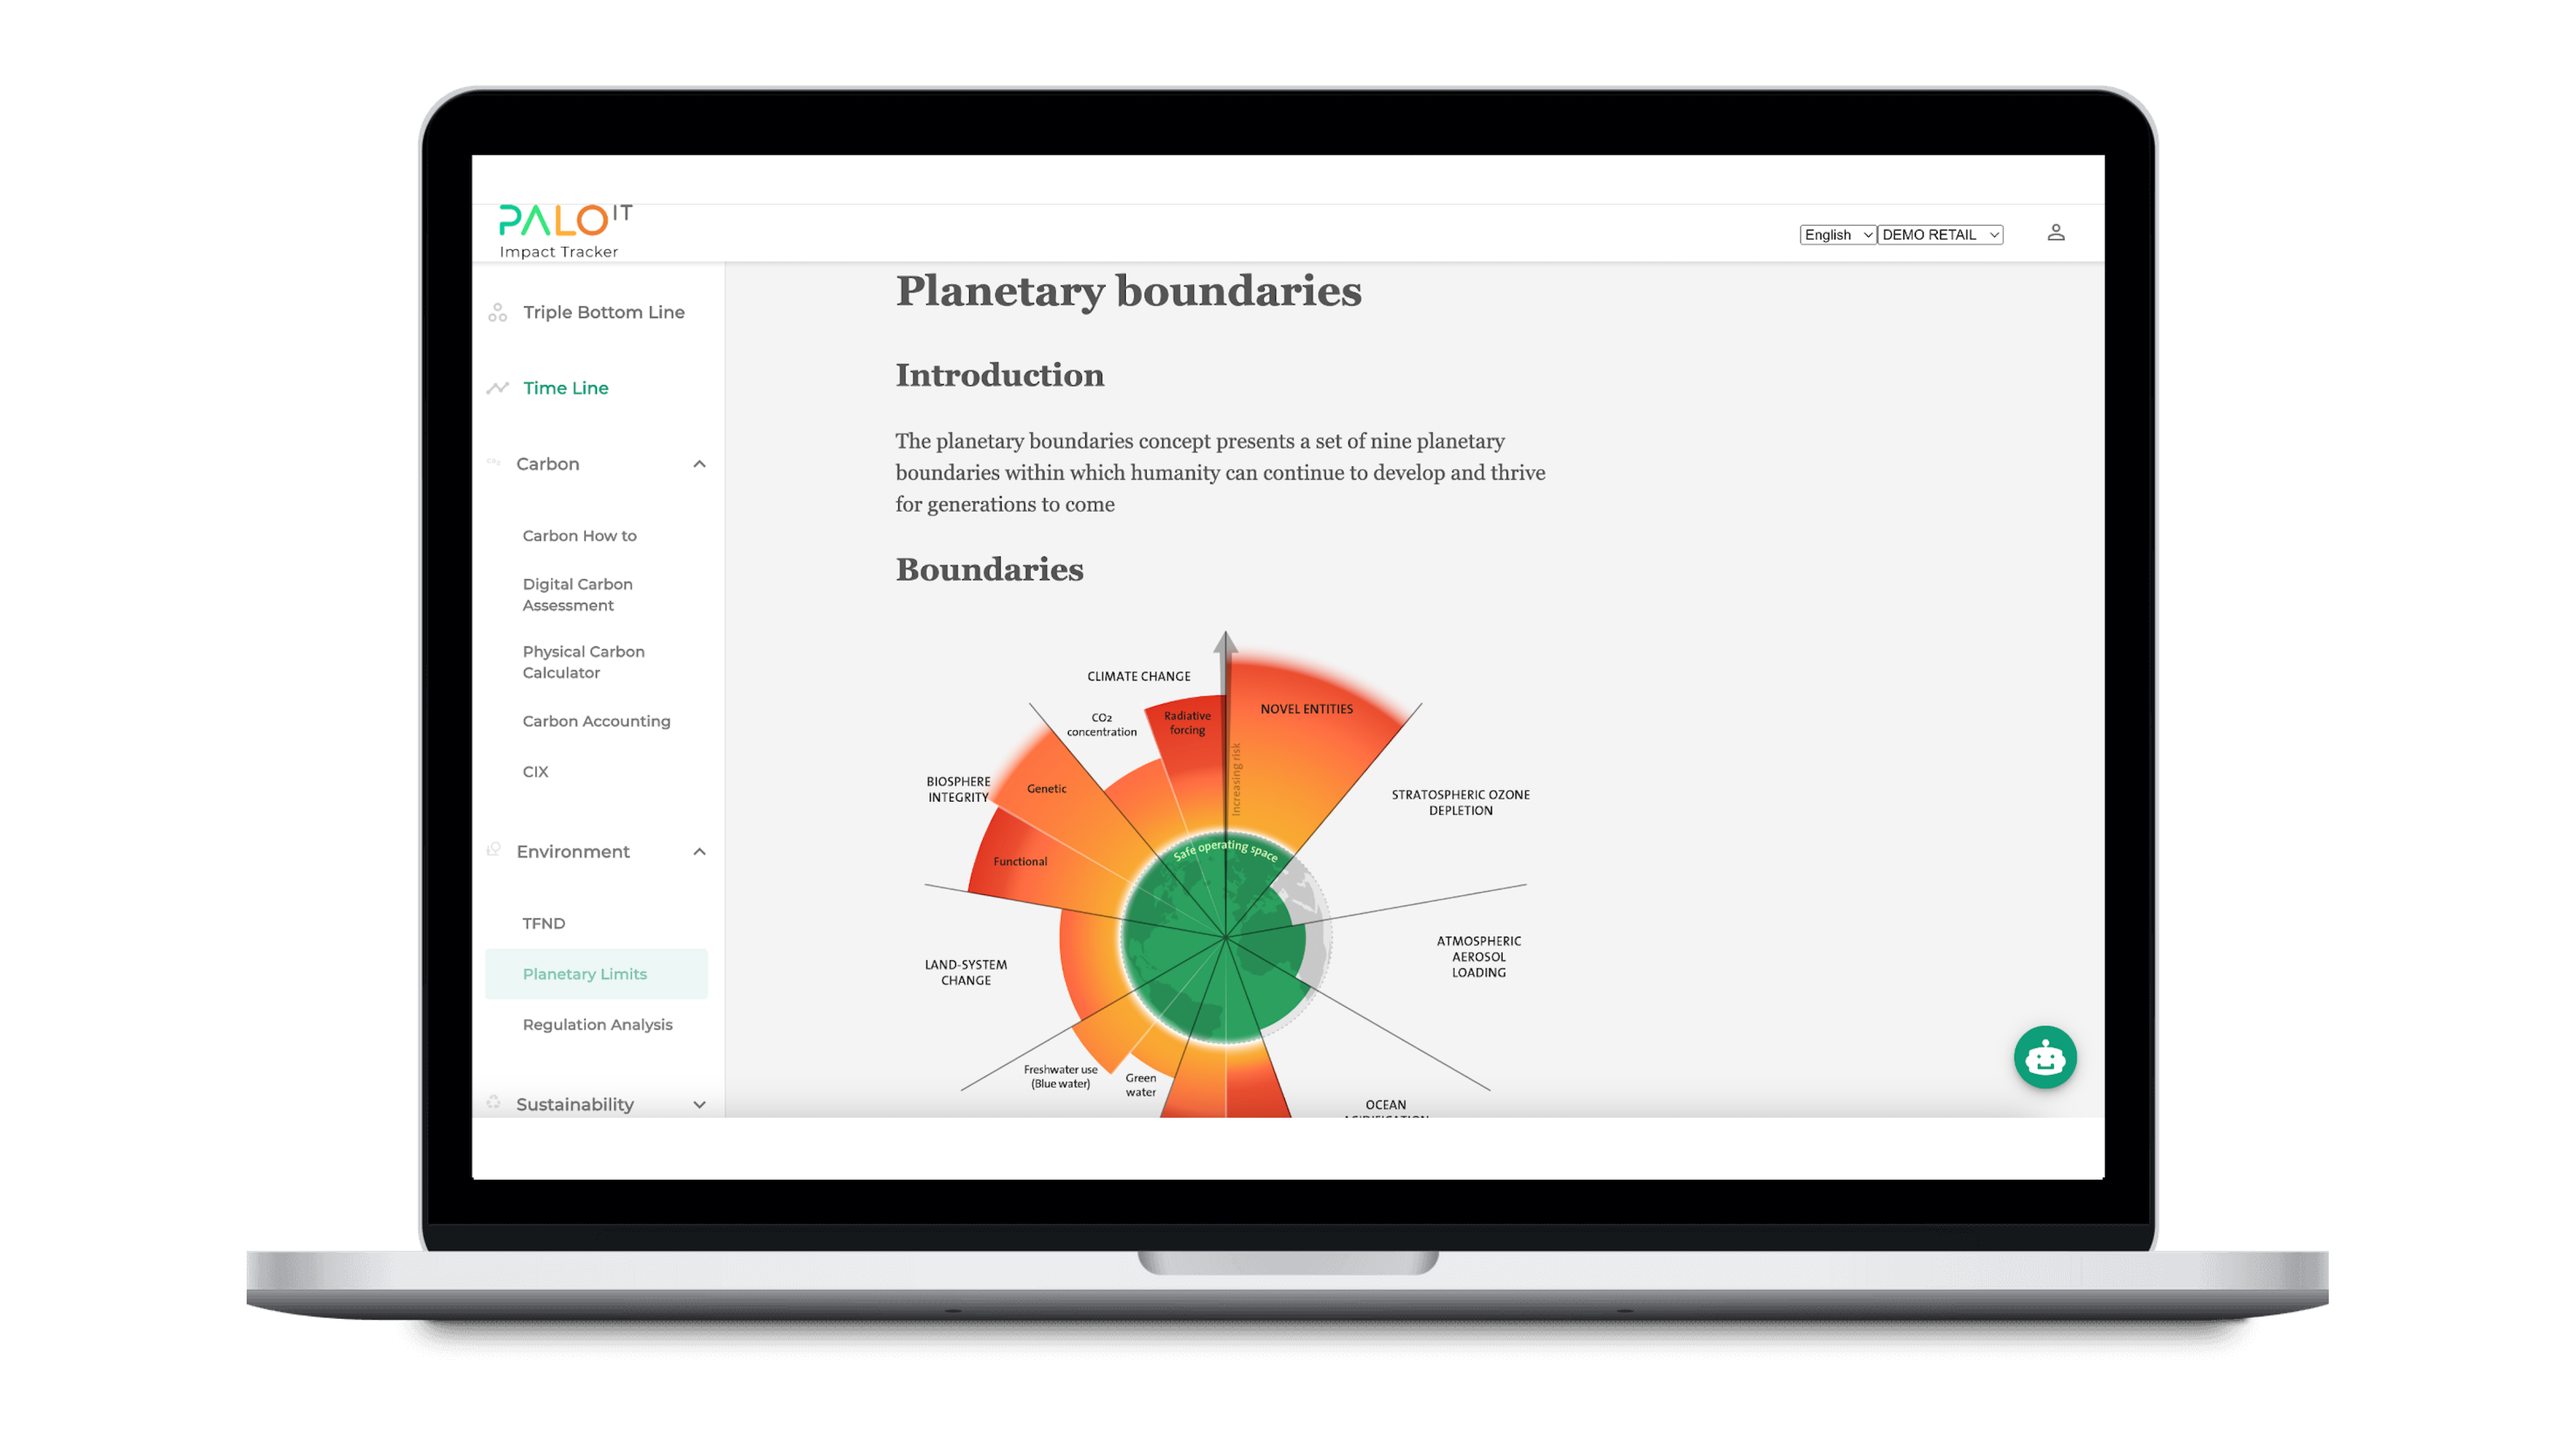 carbon accounting, carbon footprint tracker, carbon tracking, carbon measure tool, esg reporting tool, palo it impact tracker tablet